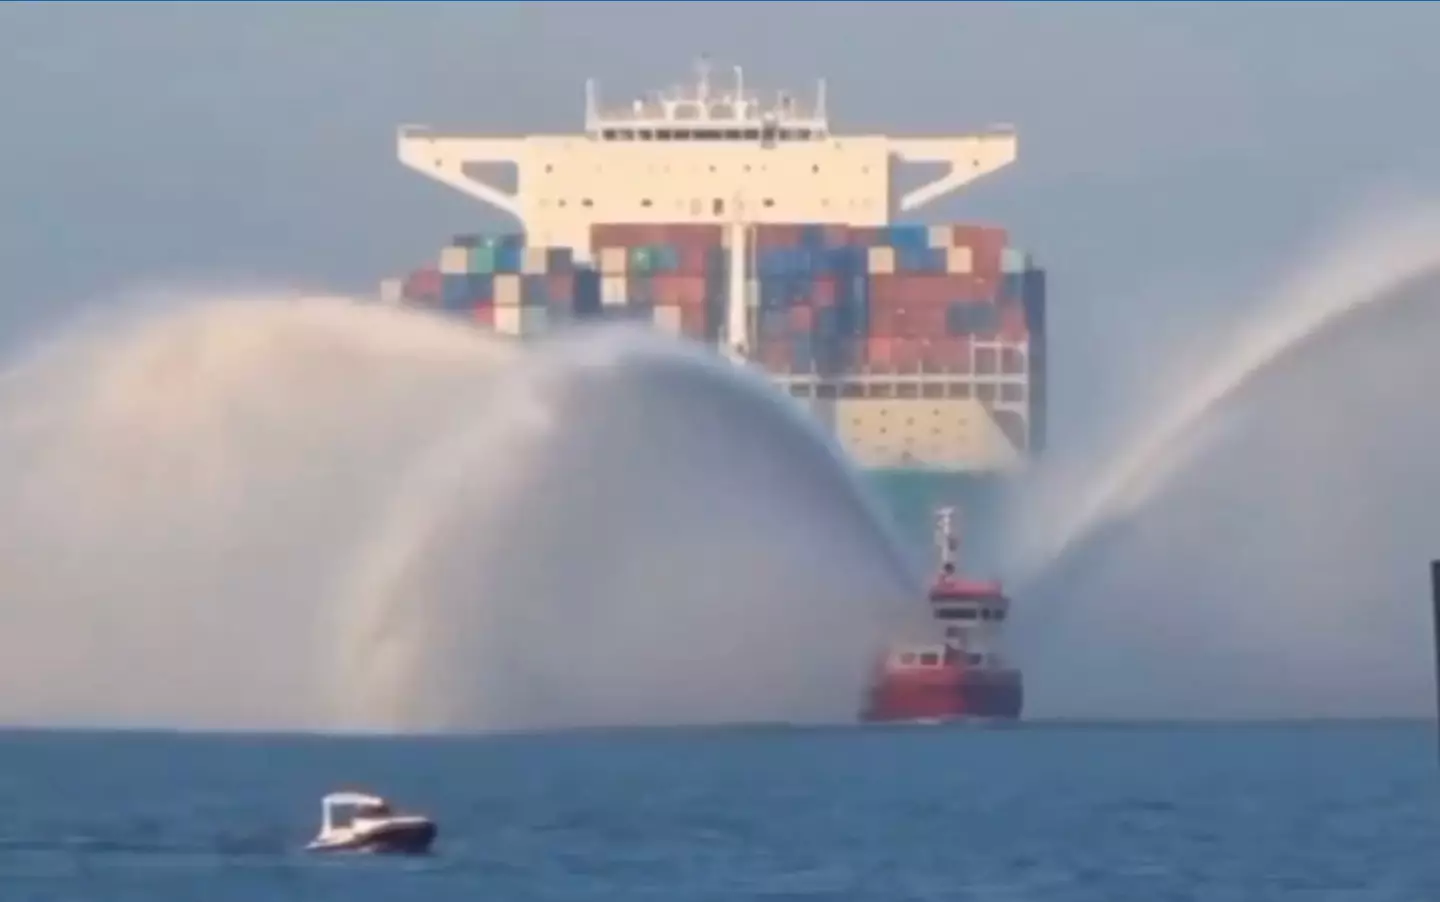 People are only just finding out the reason behind the tugboat's water display.